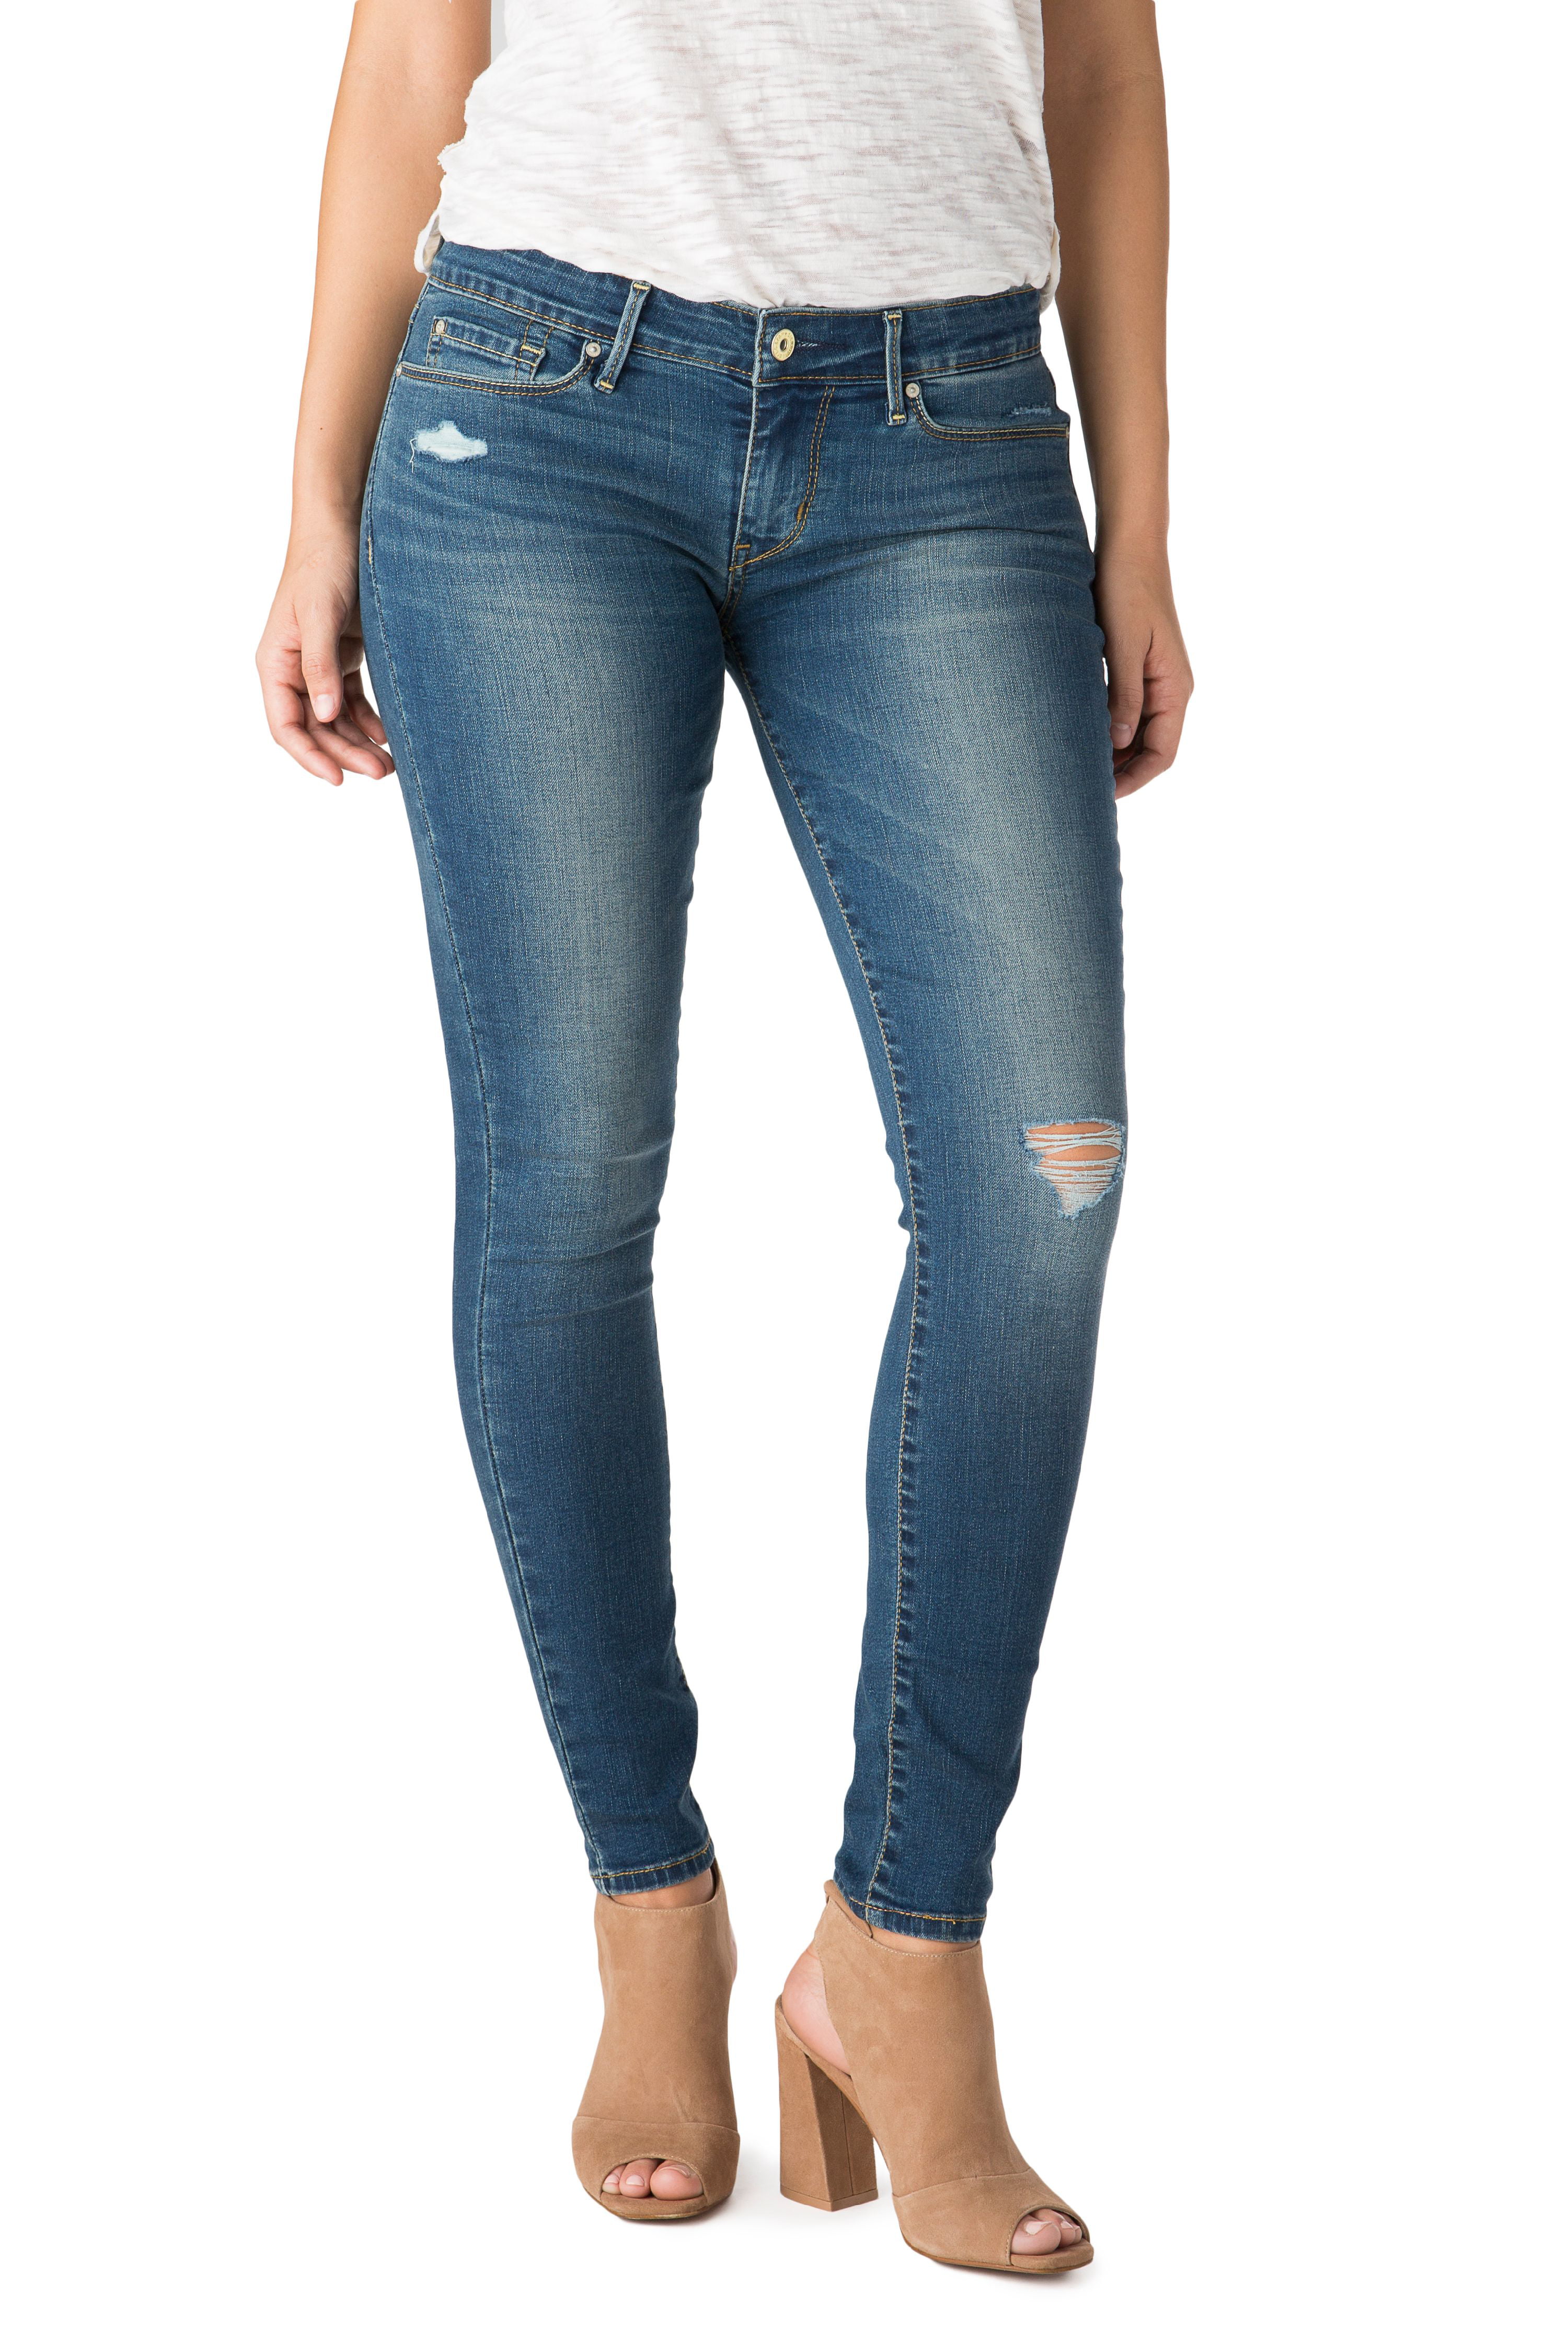 Levi's Low Rise Jeggings Portugal, SAVE 43% 